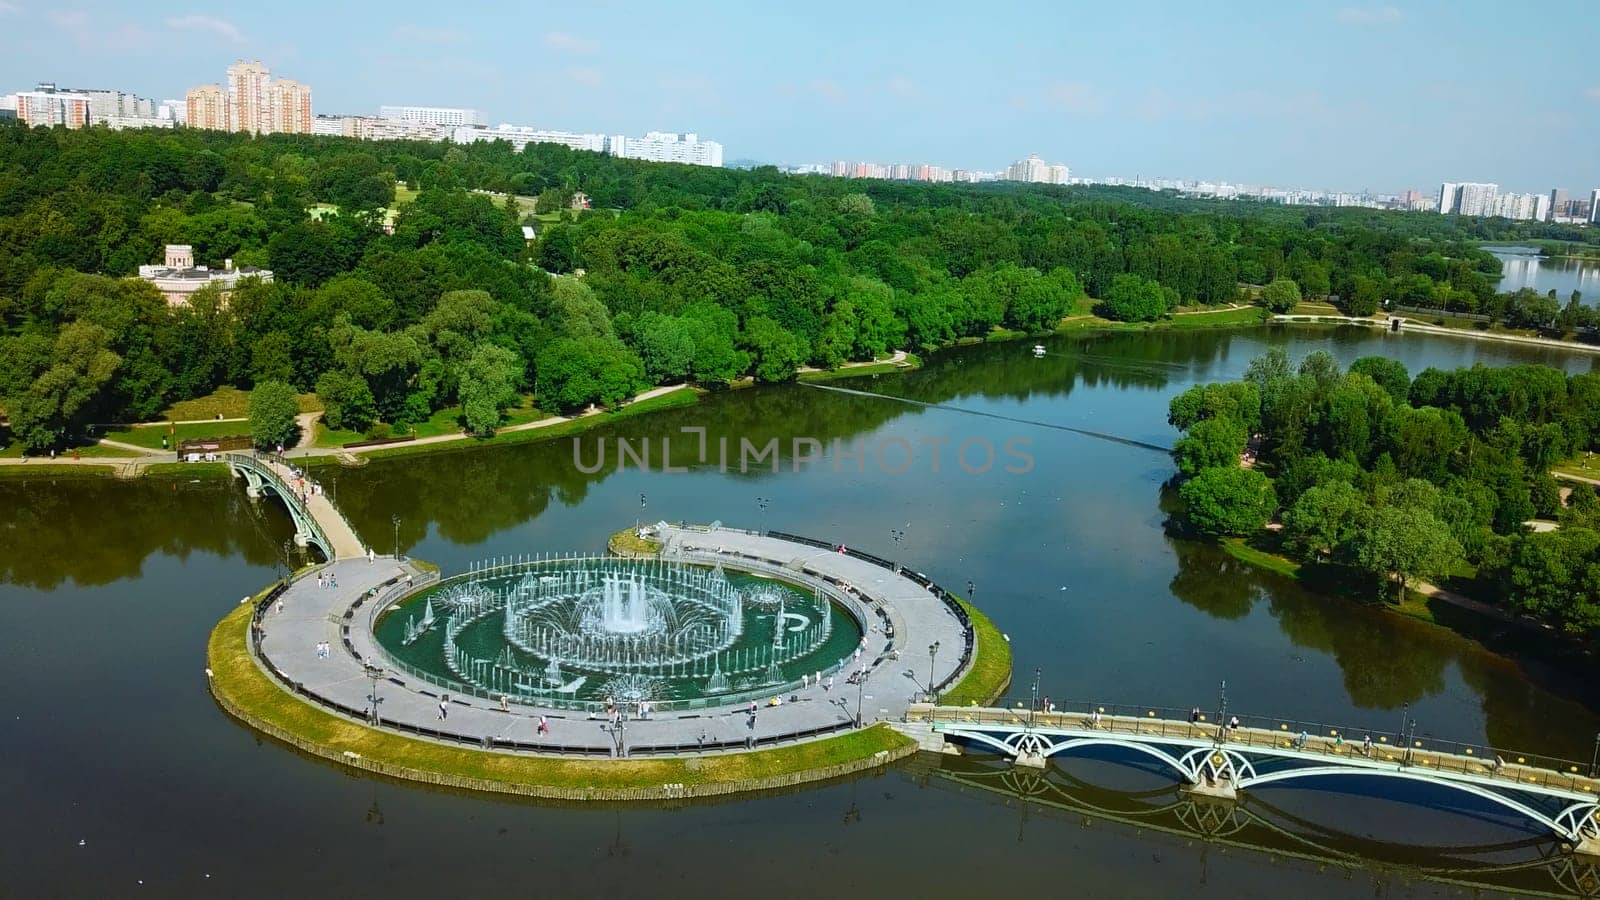 Top view of bridges in city pond with fountains. Creative. Island with bridges and fountains in city pond. Beautiful fountain complex on river island with pedestrian bridges.